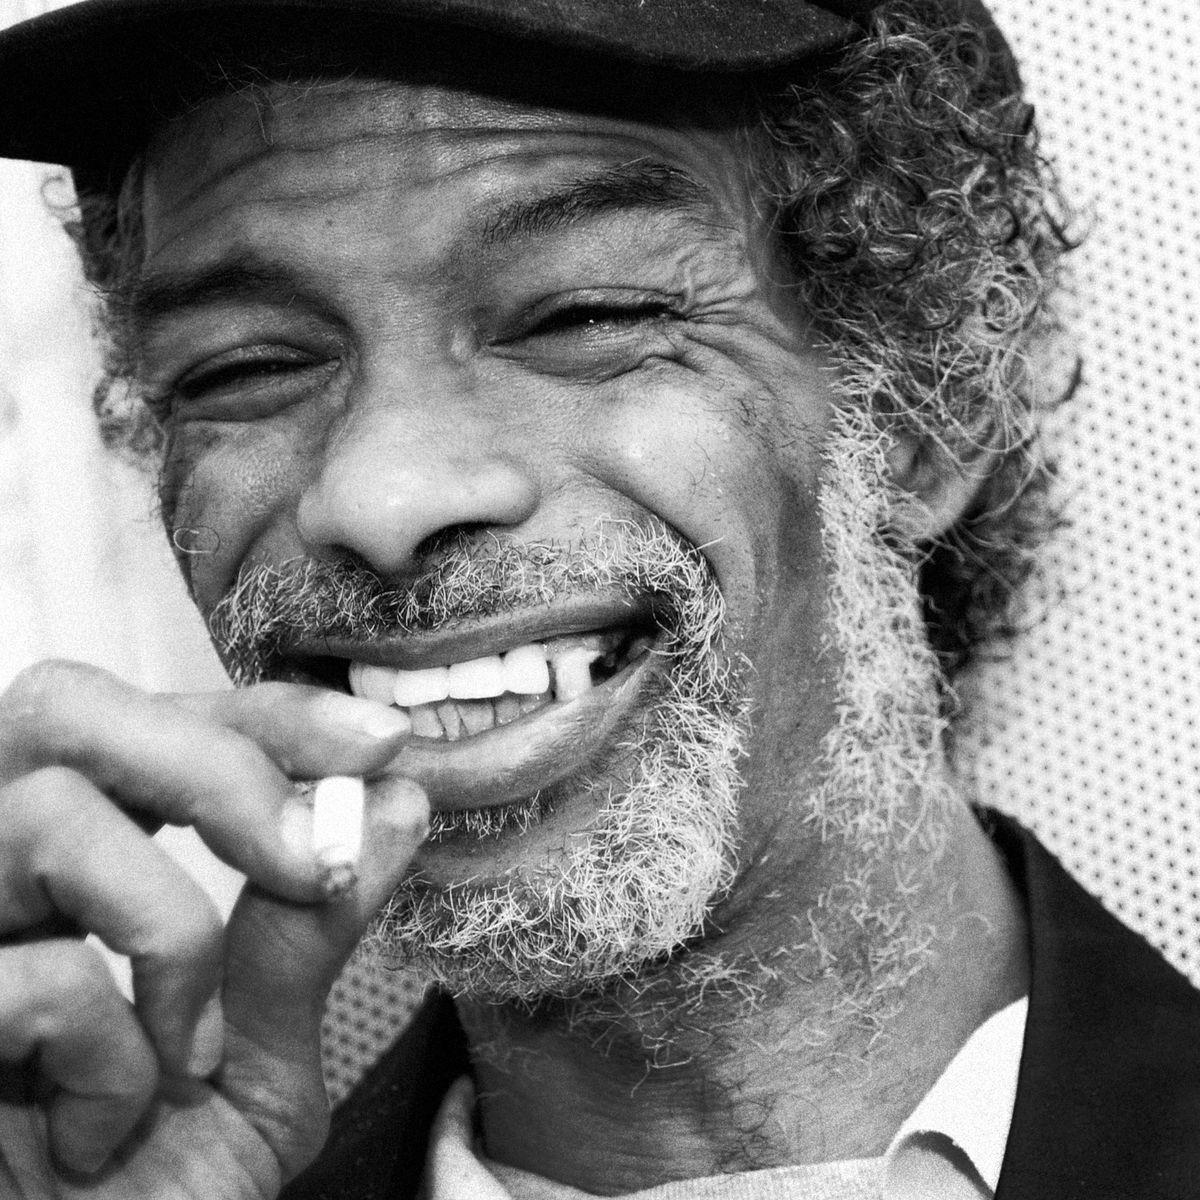 <p>Considered a significant precursor to hip-hop, “The Revolution Will Not Be Televised” is laced with Gil Scott-Heron’s trademark sense of humour. He ridicules American politics, celebrities, television shows, popular music, and advertising in equal measure. However, one line stands out, and it is clearly not a joke: “There will be no pictures of pigs shooting down brothers on the instant replay.” The lyric is repeated twice. It’s all the more chilling today, at a time when videos of Black people being beaten or killed by police are everywhere in the media and being disseminated around the world.</p><p>In an interview for a PBS documentary, <a href="https://www.openculture.com/2020/06/gil-scott-heron-spells-out-why-the-revolution-will-not-be-televised.html" rel="noreferrer noopener">Scott-Heron explained the meaning behind “The Revolution Will Not Be Televised”</a>: “You have to change your mind before you change the way you’re living and the way you move. The thing that’s going to change people is something that no one will ever be able to capture on film, it will just be something that you see and all of a sudden you realize that I’m on the wrong page, or I’m on the right page but I’m on the wrong note. And I’ve got to get in sync with everyone else to understand what is going on in this country.” In other words, the first step to social change is in our minds. Only then can we take action to make the world a more equitable place.</p><p><a href="https://www.youtube.com/watch?v=QnJFhuOWgXg" rel="noreferrer noopener">Listen to the song here</a></p>